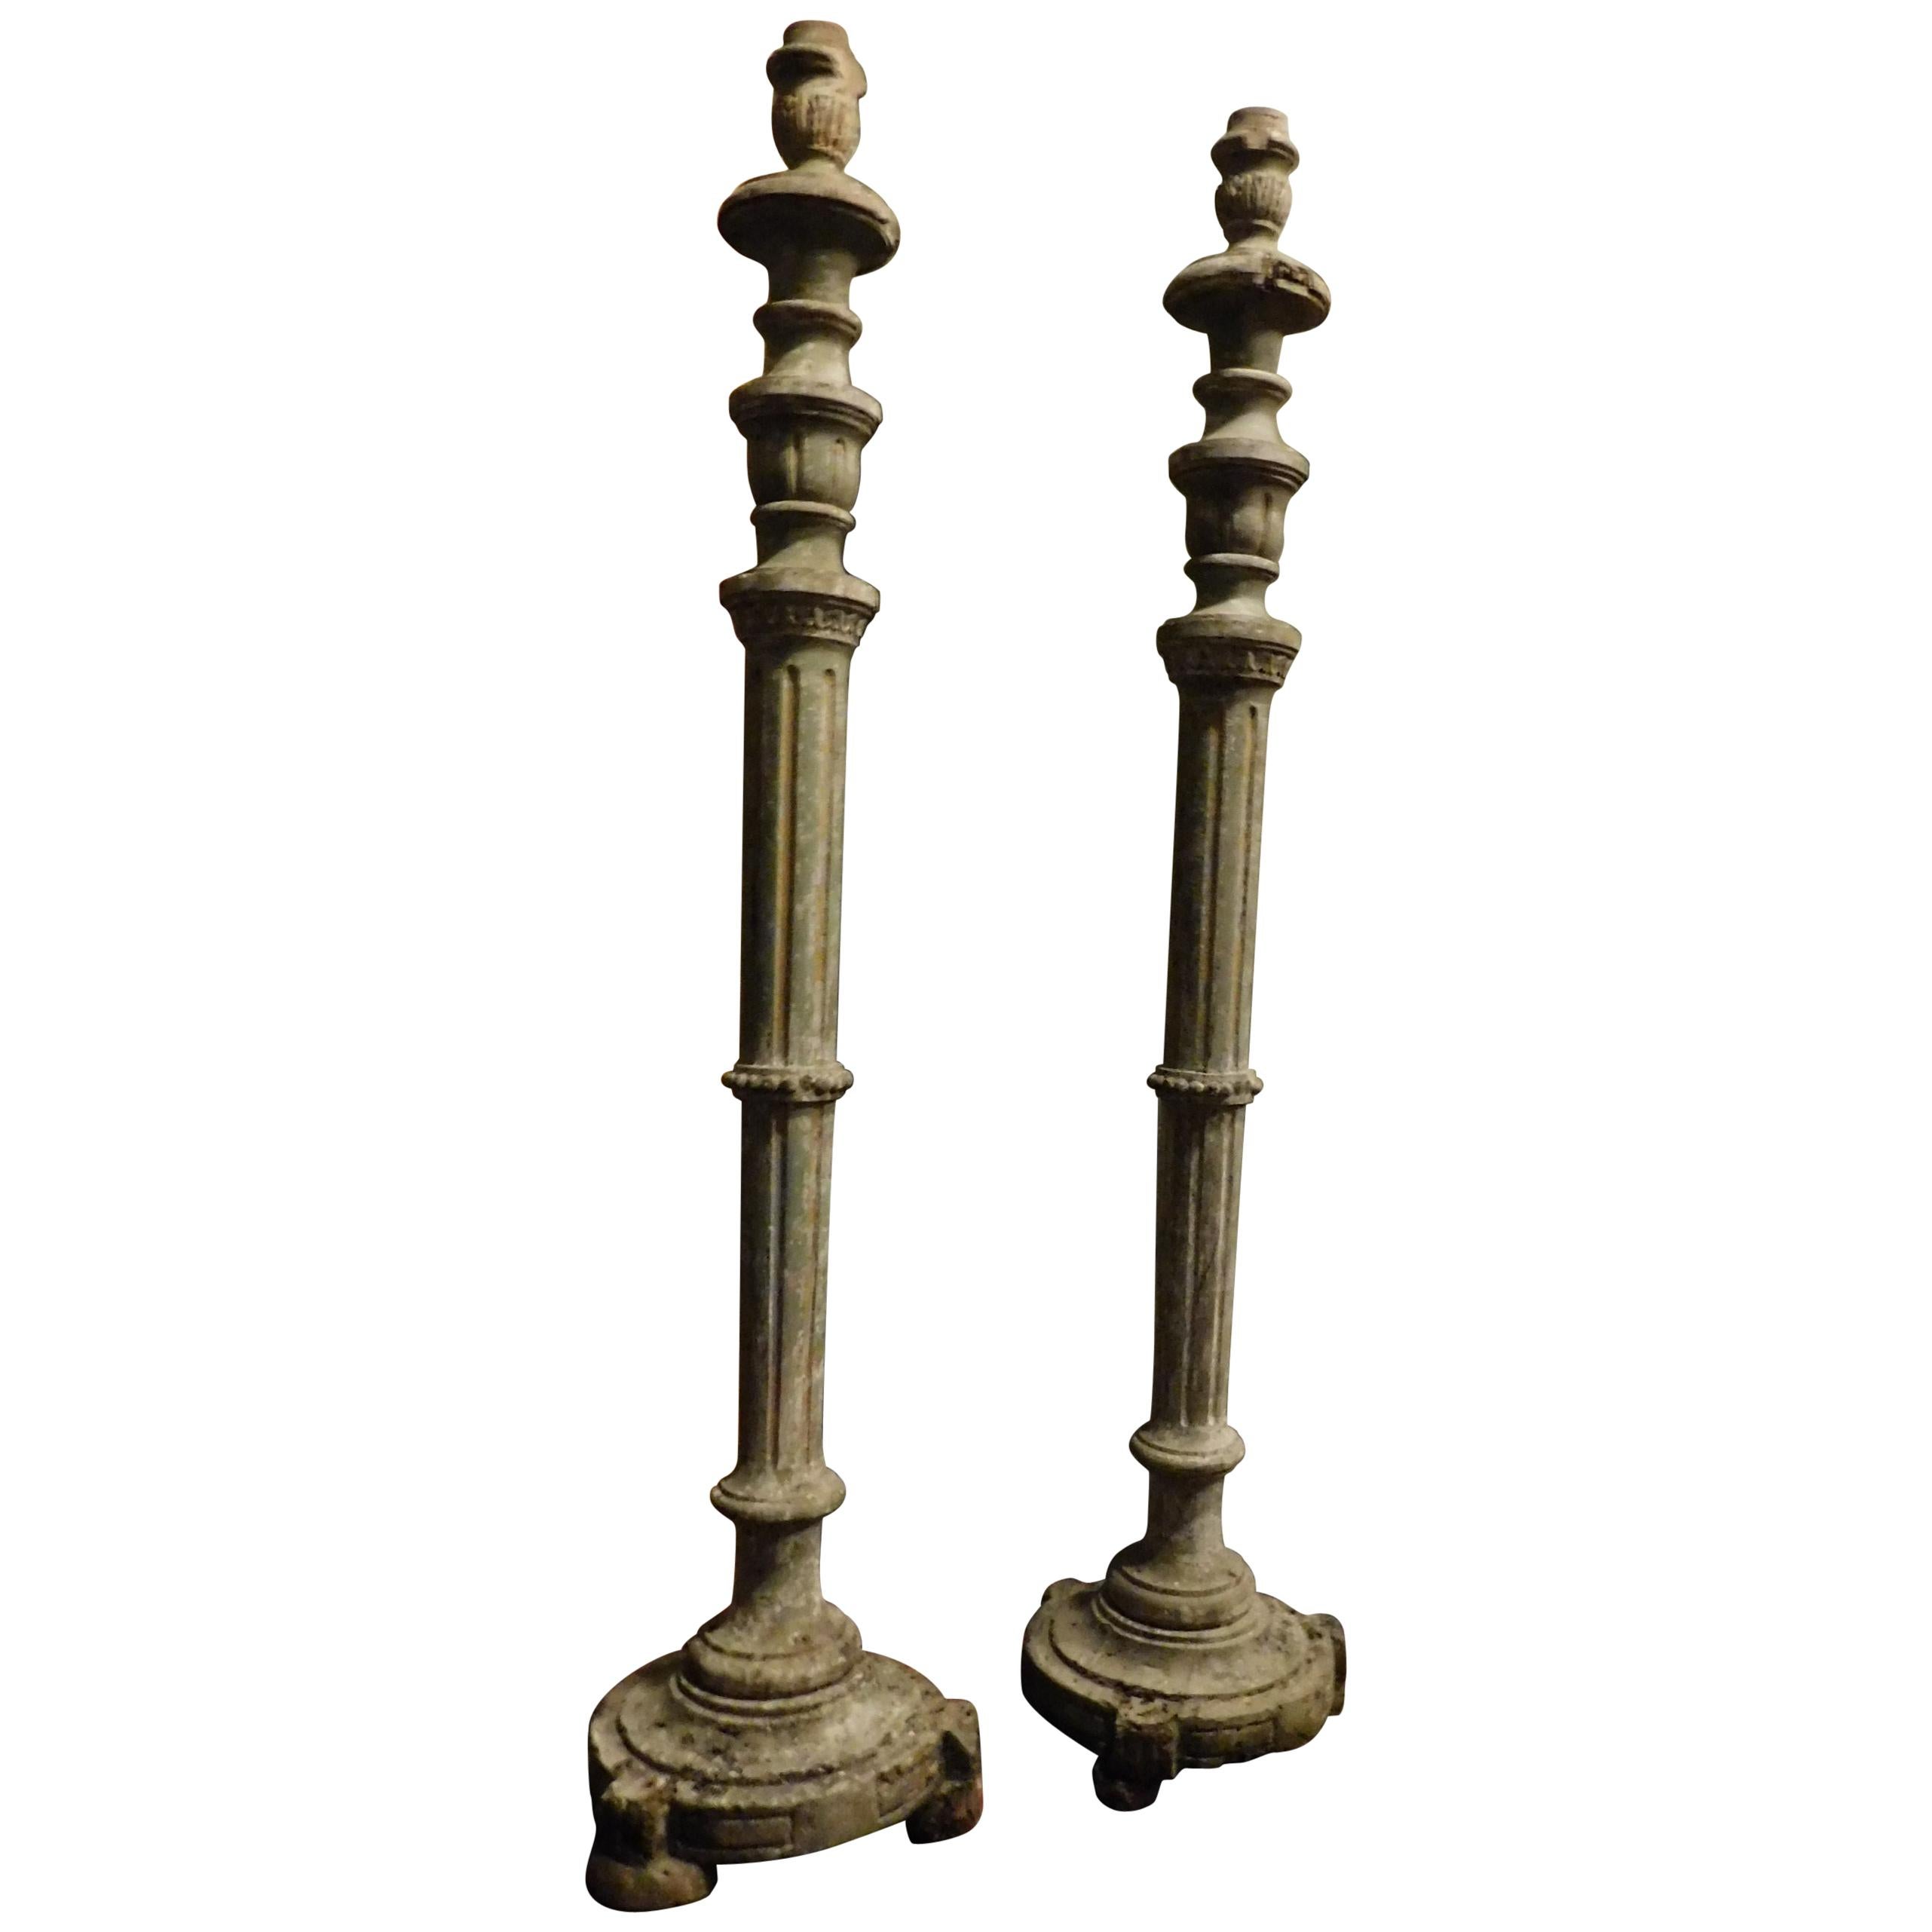 19th Century Antiques Two Lacquered Wooden Candlesticks